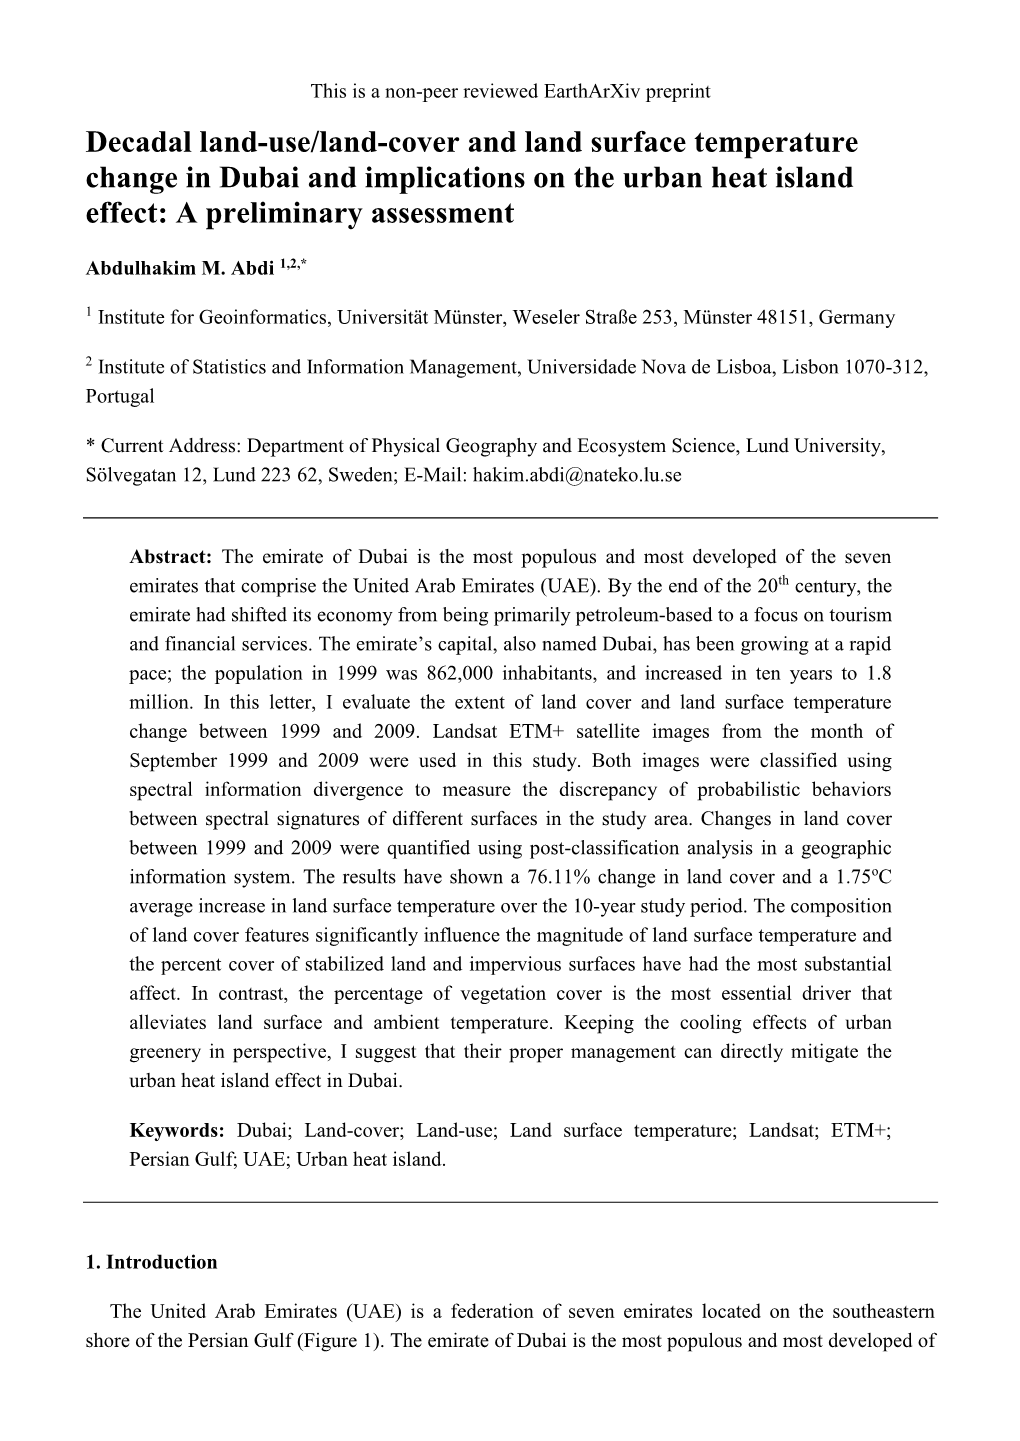 Decadal Land-Use/Land-Cover and Land Surface Temperature Change in Dubai and Implications on the Urban Heat Island Effect: a Preliminary Assessment